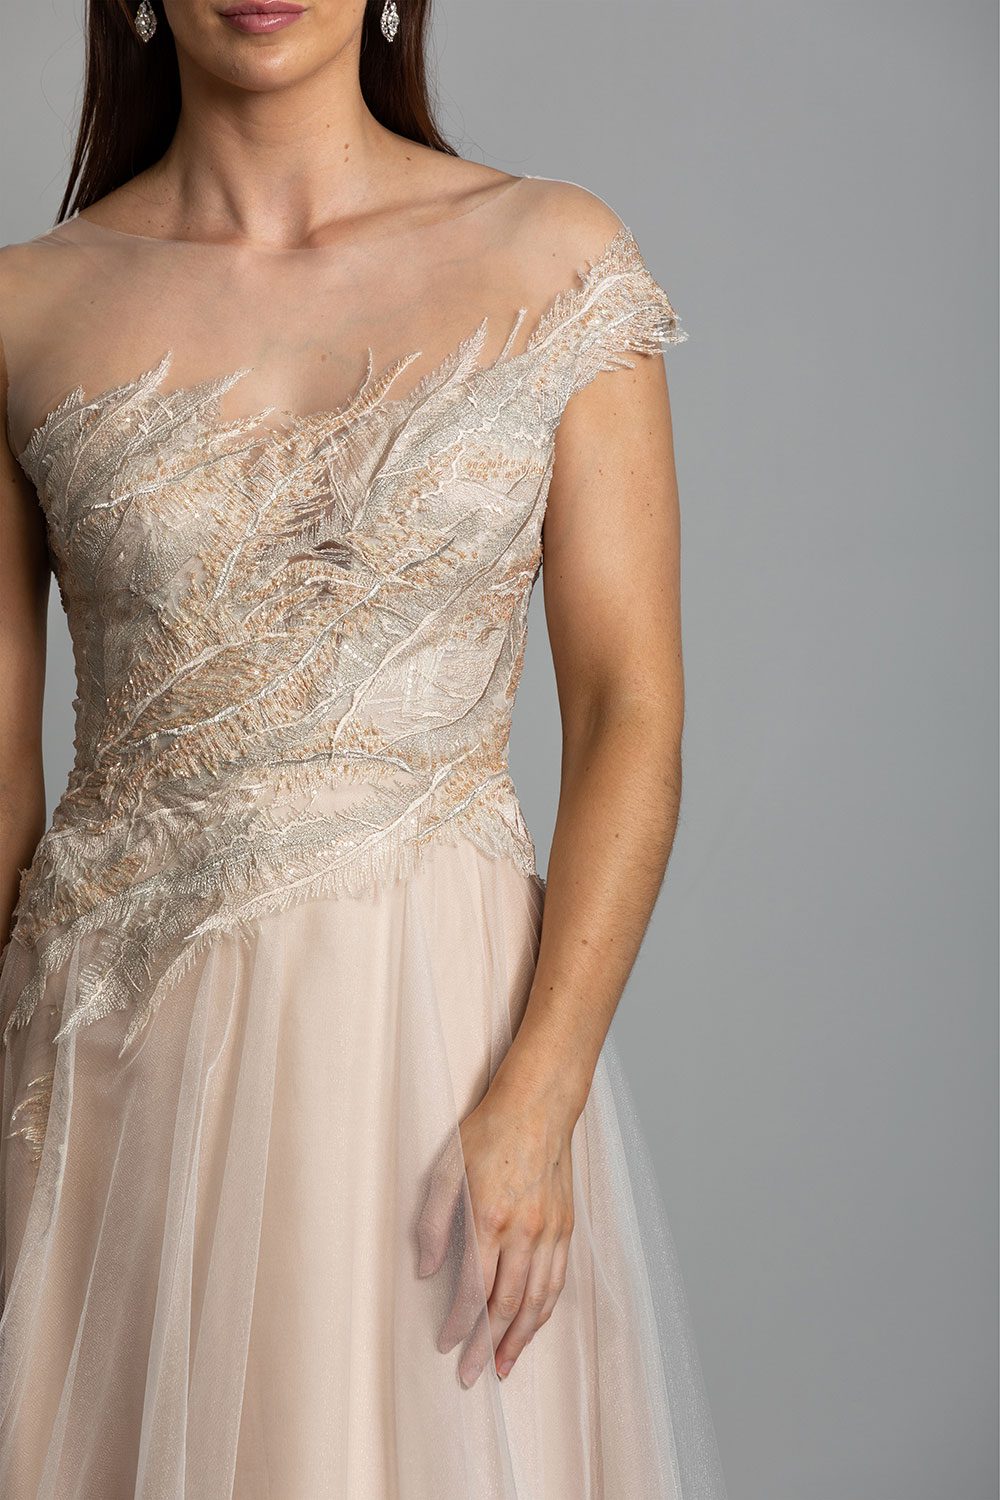 Takara Wedding Dress from Vinka Design. This glorious A-line gown is a wonderland vision in blush. Featuring a dreamscape of luxe, intricately embroidered beaded feather lace, and layers of dreamy, soft gold tulle on a blush silk organza base. Close up of model wearing beaded feather lace bodice with one shoulder detail and soft gold tulle skirt